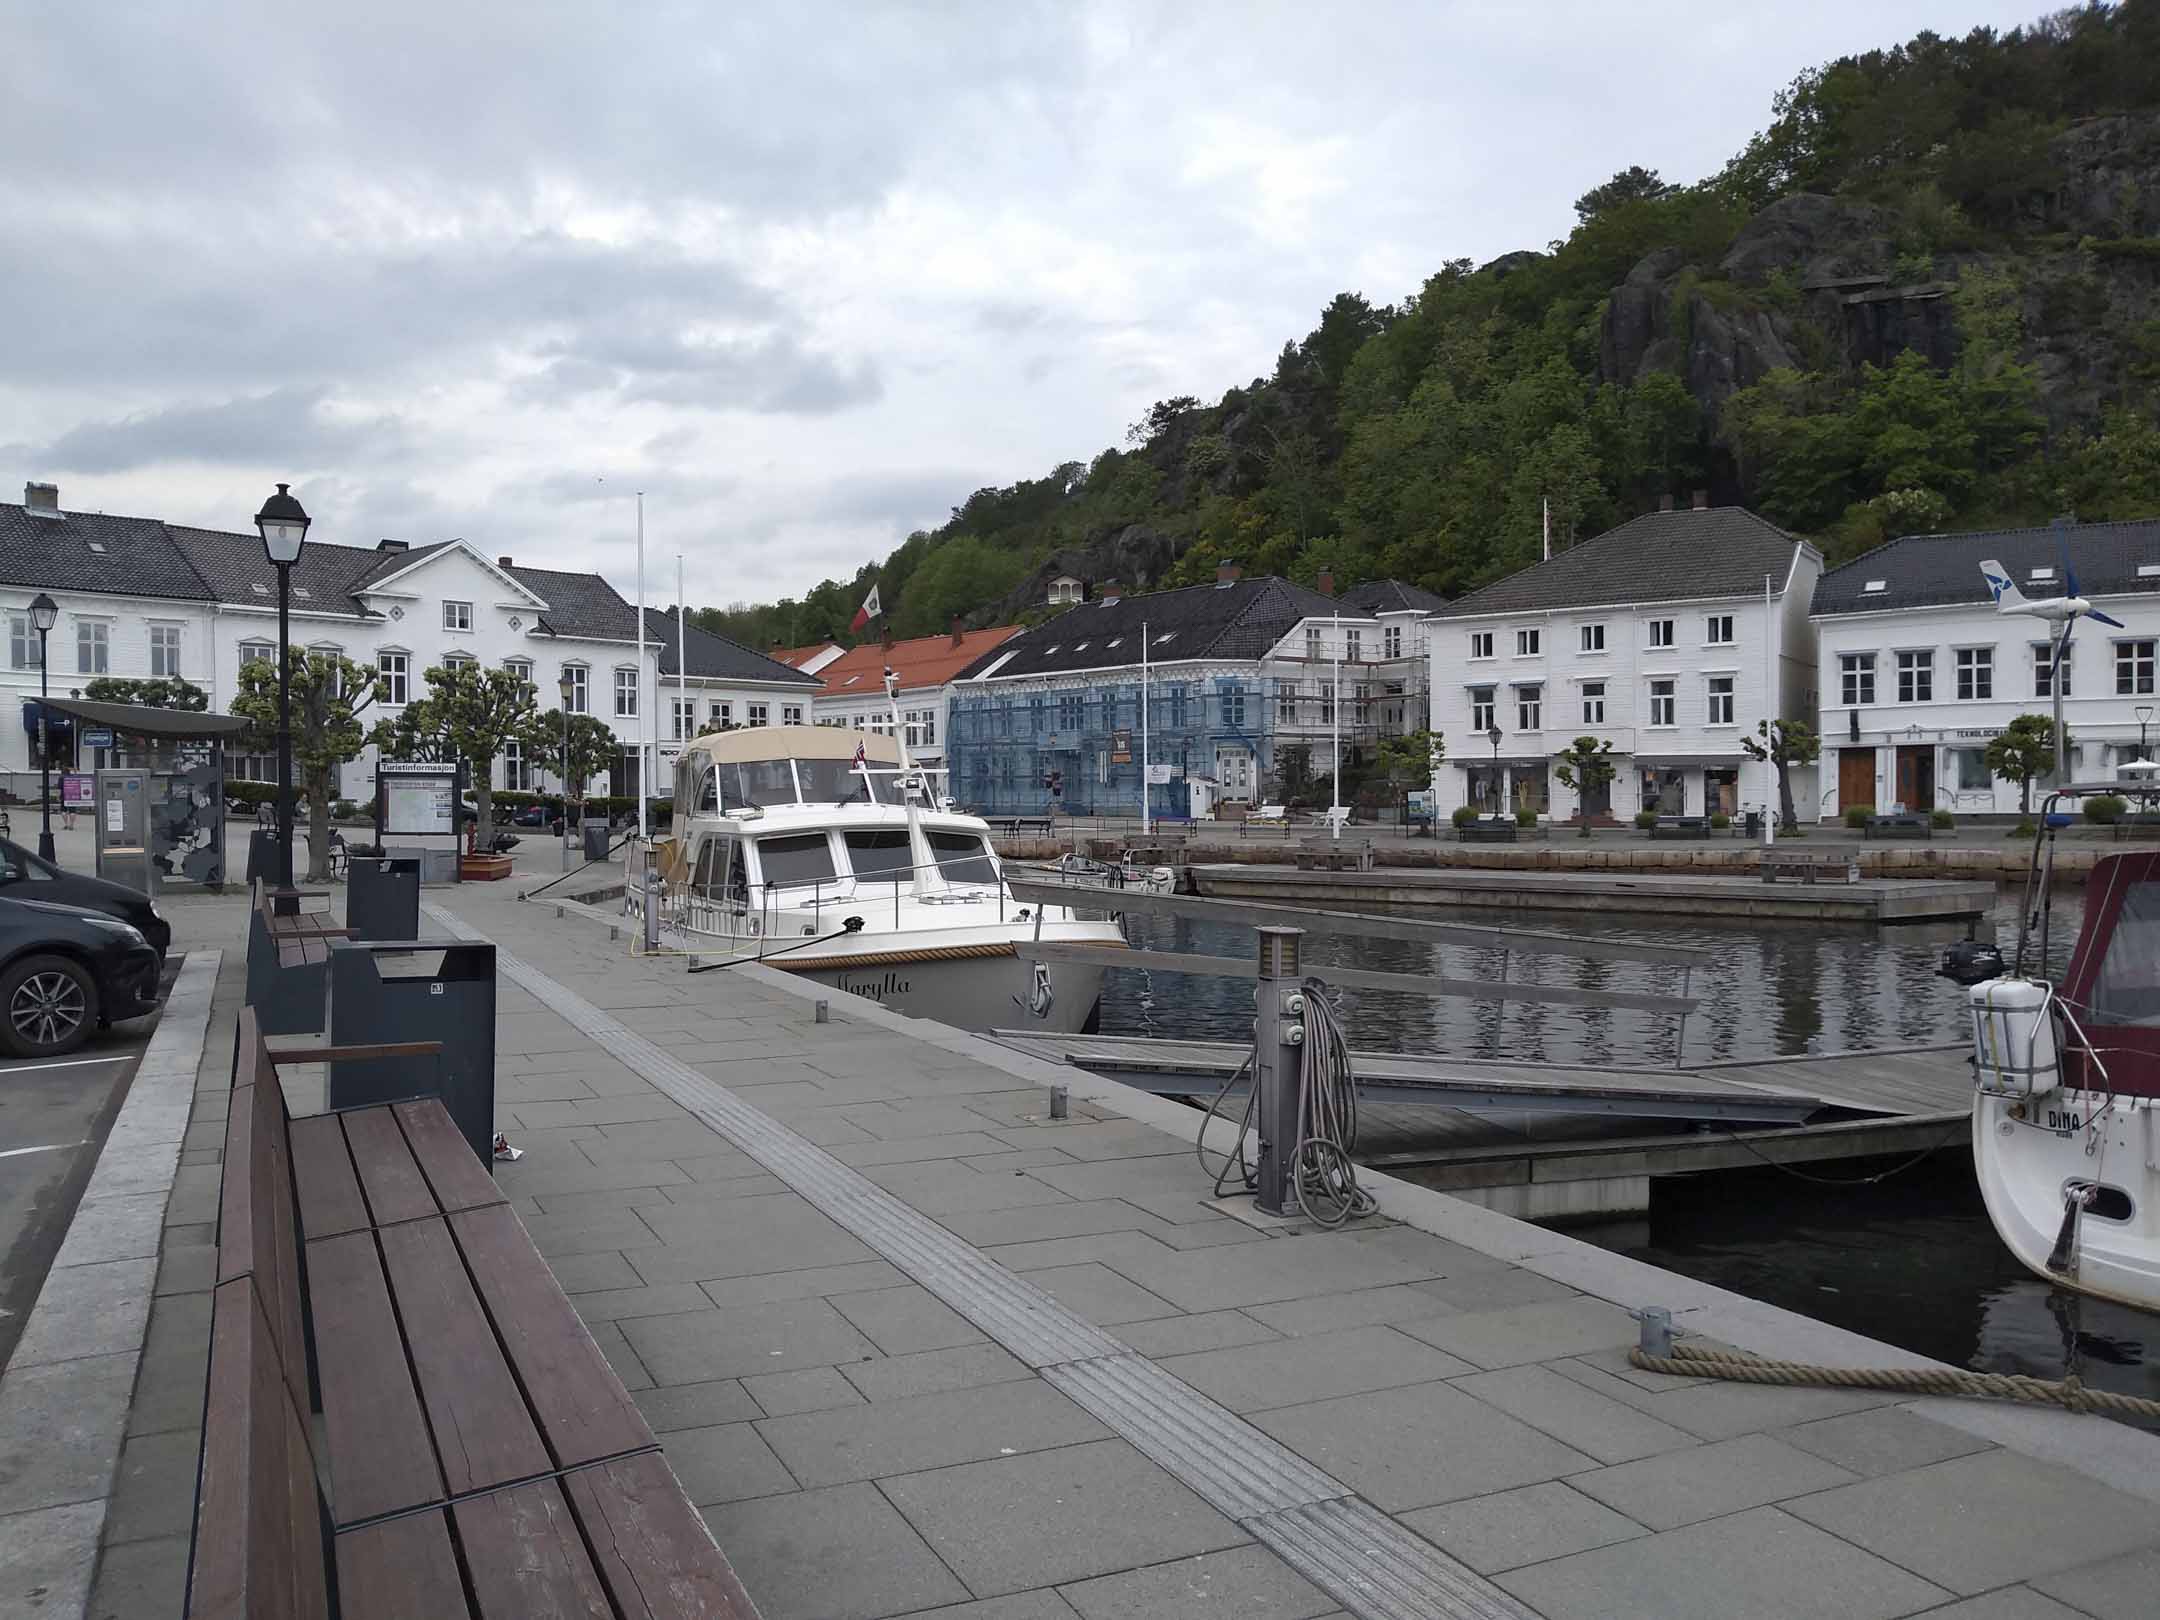 Linssen yachts at Beautiful city of Risør, Norway